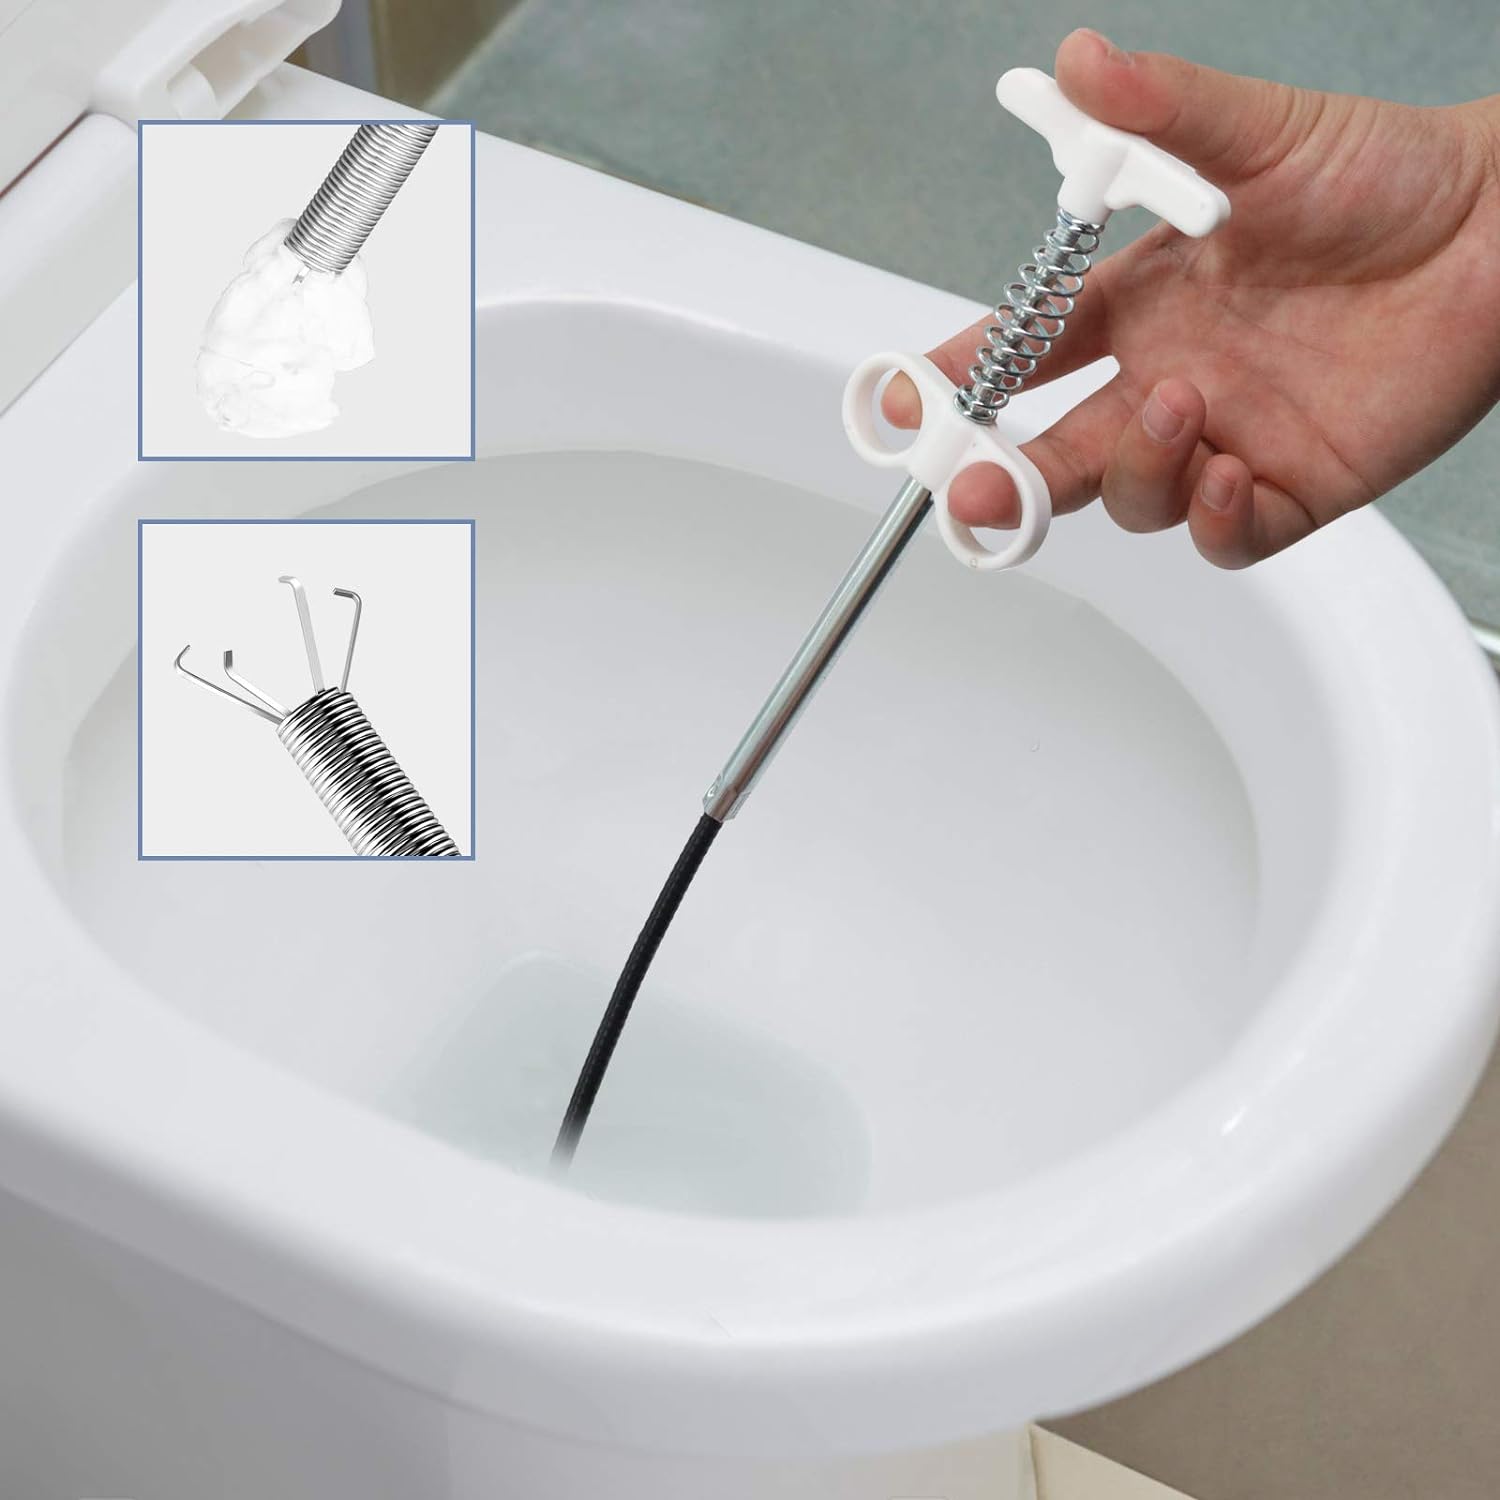 Miai Home Flexible Sink Grabber Reacher Tool With 4 Claws Retractable Clean  Claw for Litter Pick